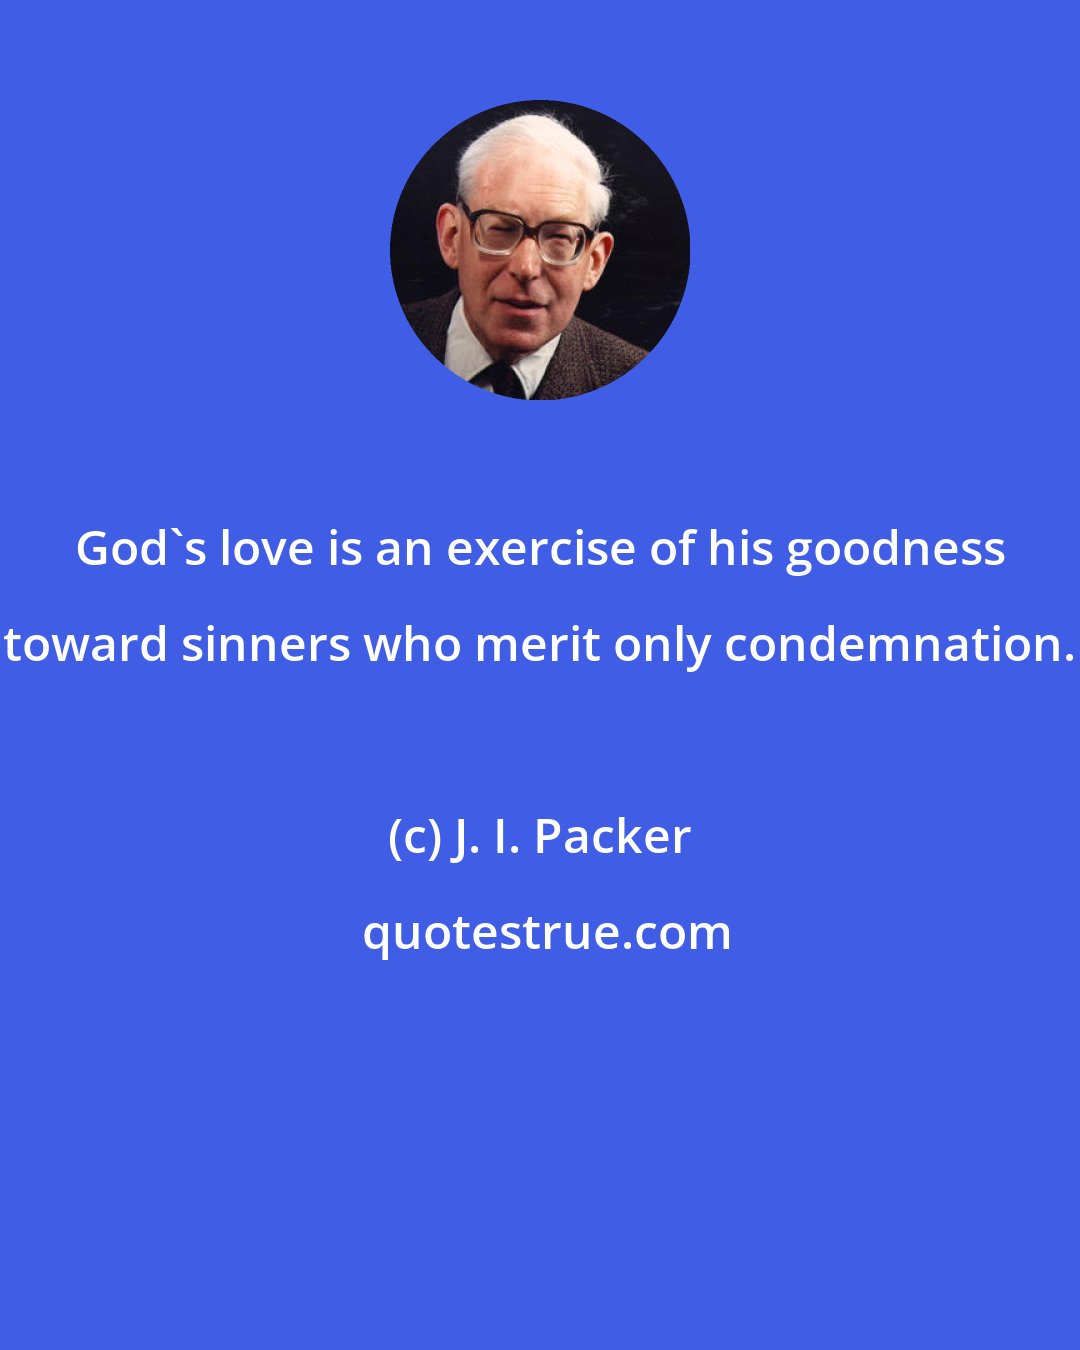 J. I. Packer: God's love is an exercise of his goodness toward sinners who merit only condemnation.